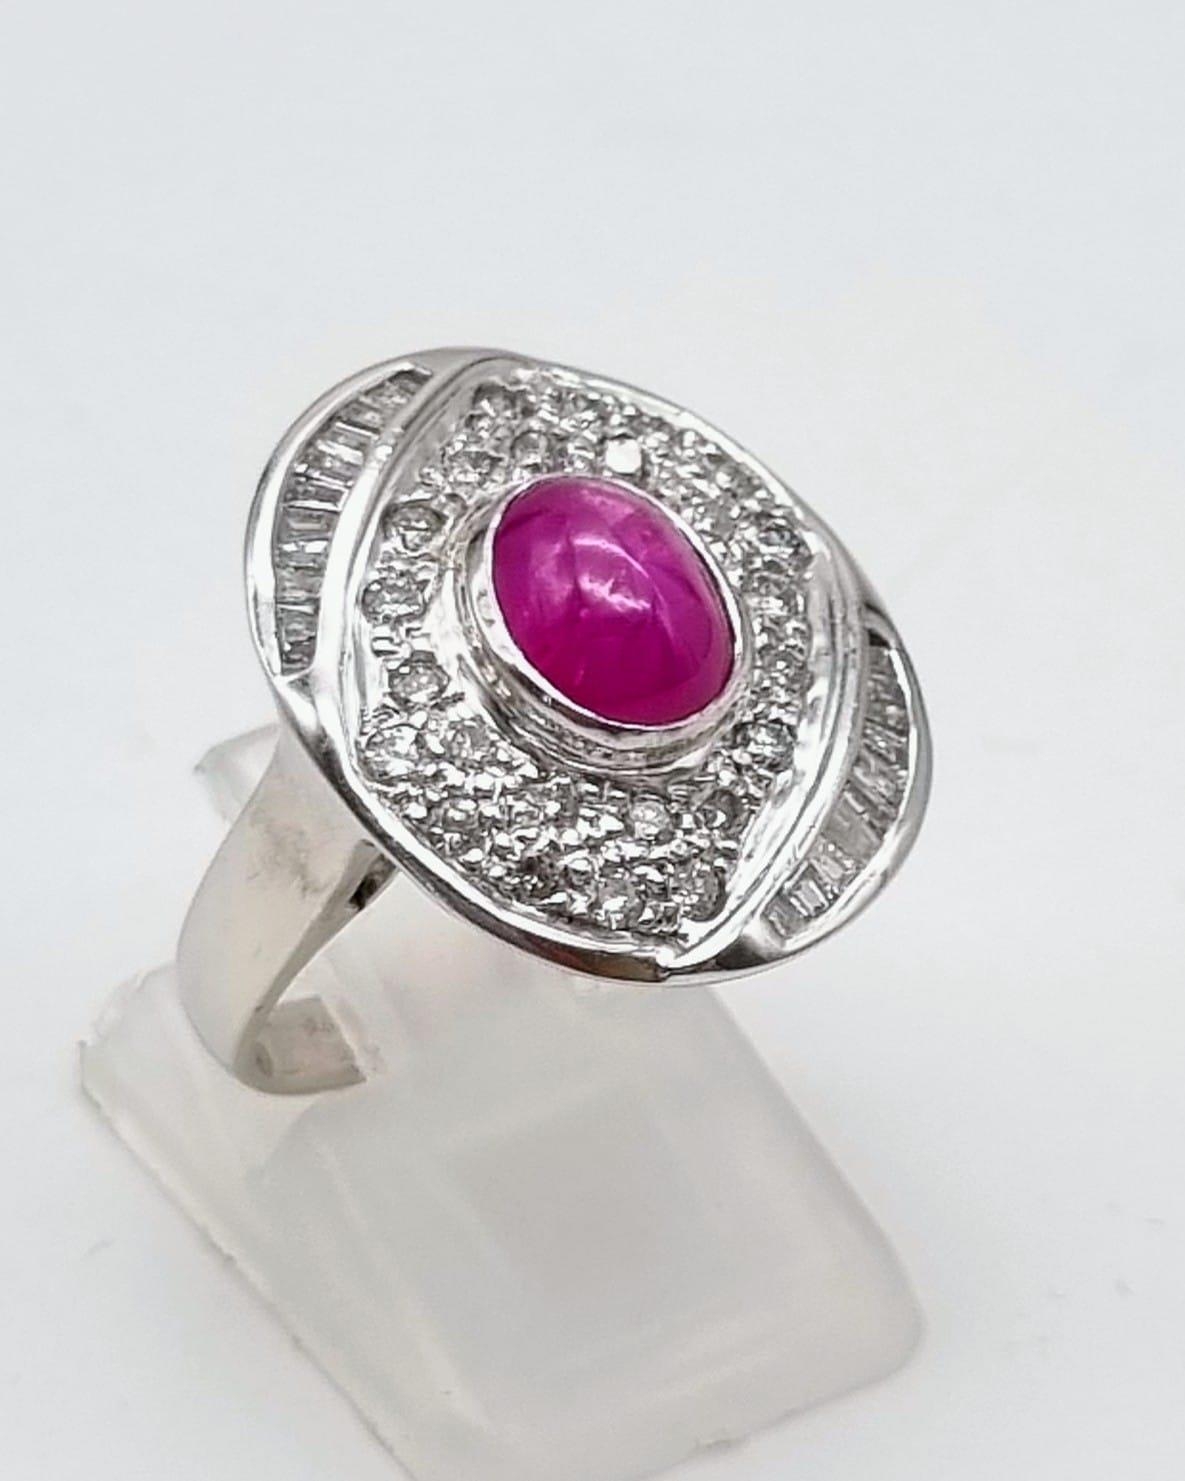 An 18K White Gold Burma Star Ruby and Diamond Ring. Central Burma Star ruby surrounded by a